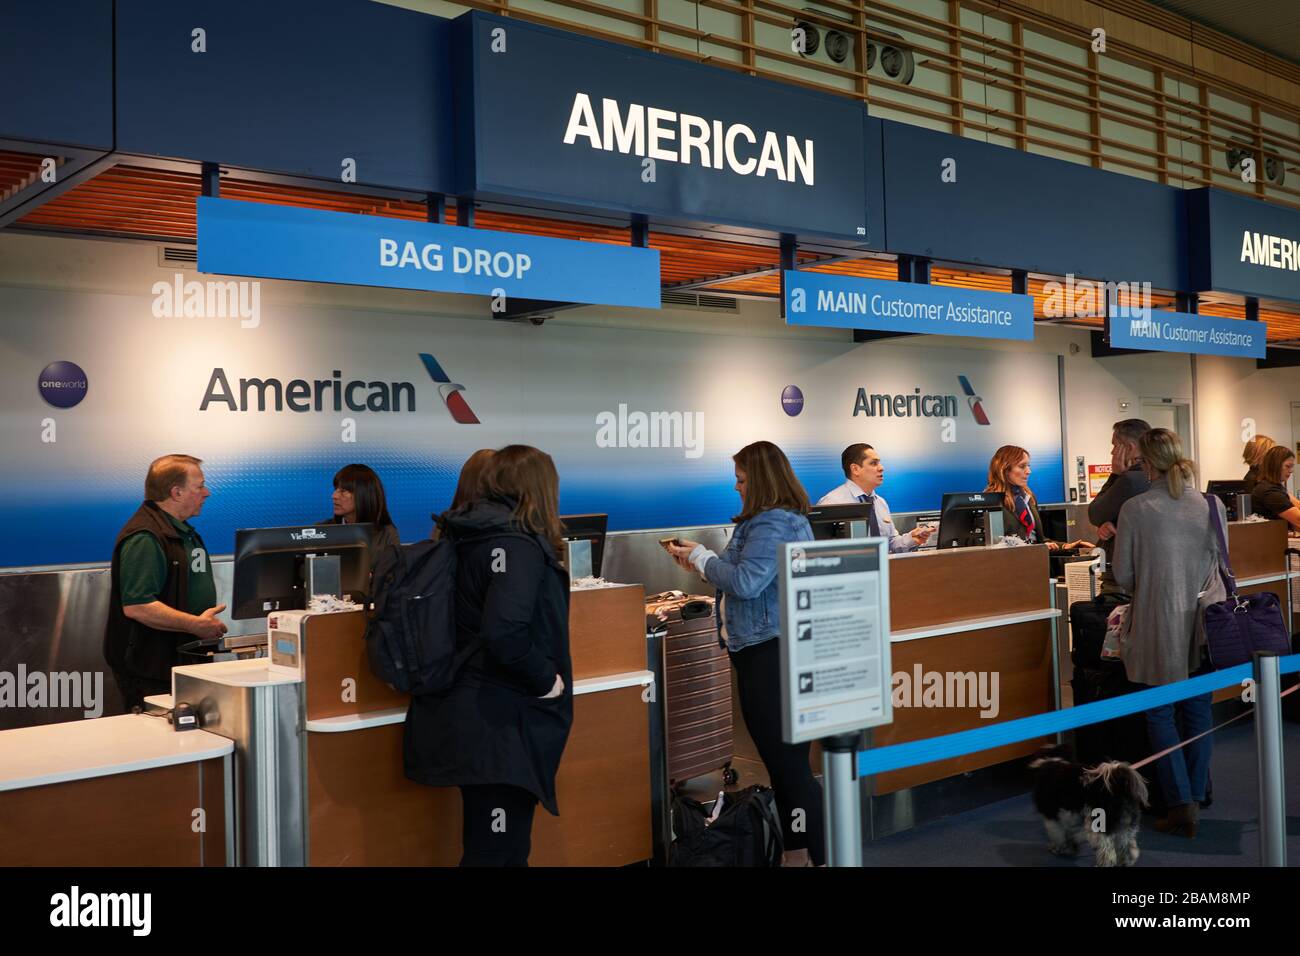 Portland, OR, USA - Feb 16, 2020: Passengers check their baggages at the American Airlines check-in desk in Portland International Airport. Stock Photo